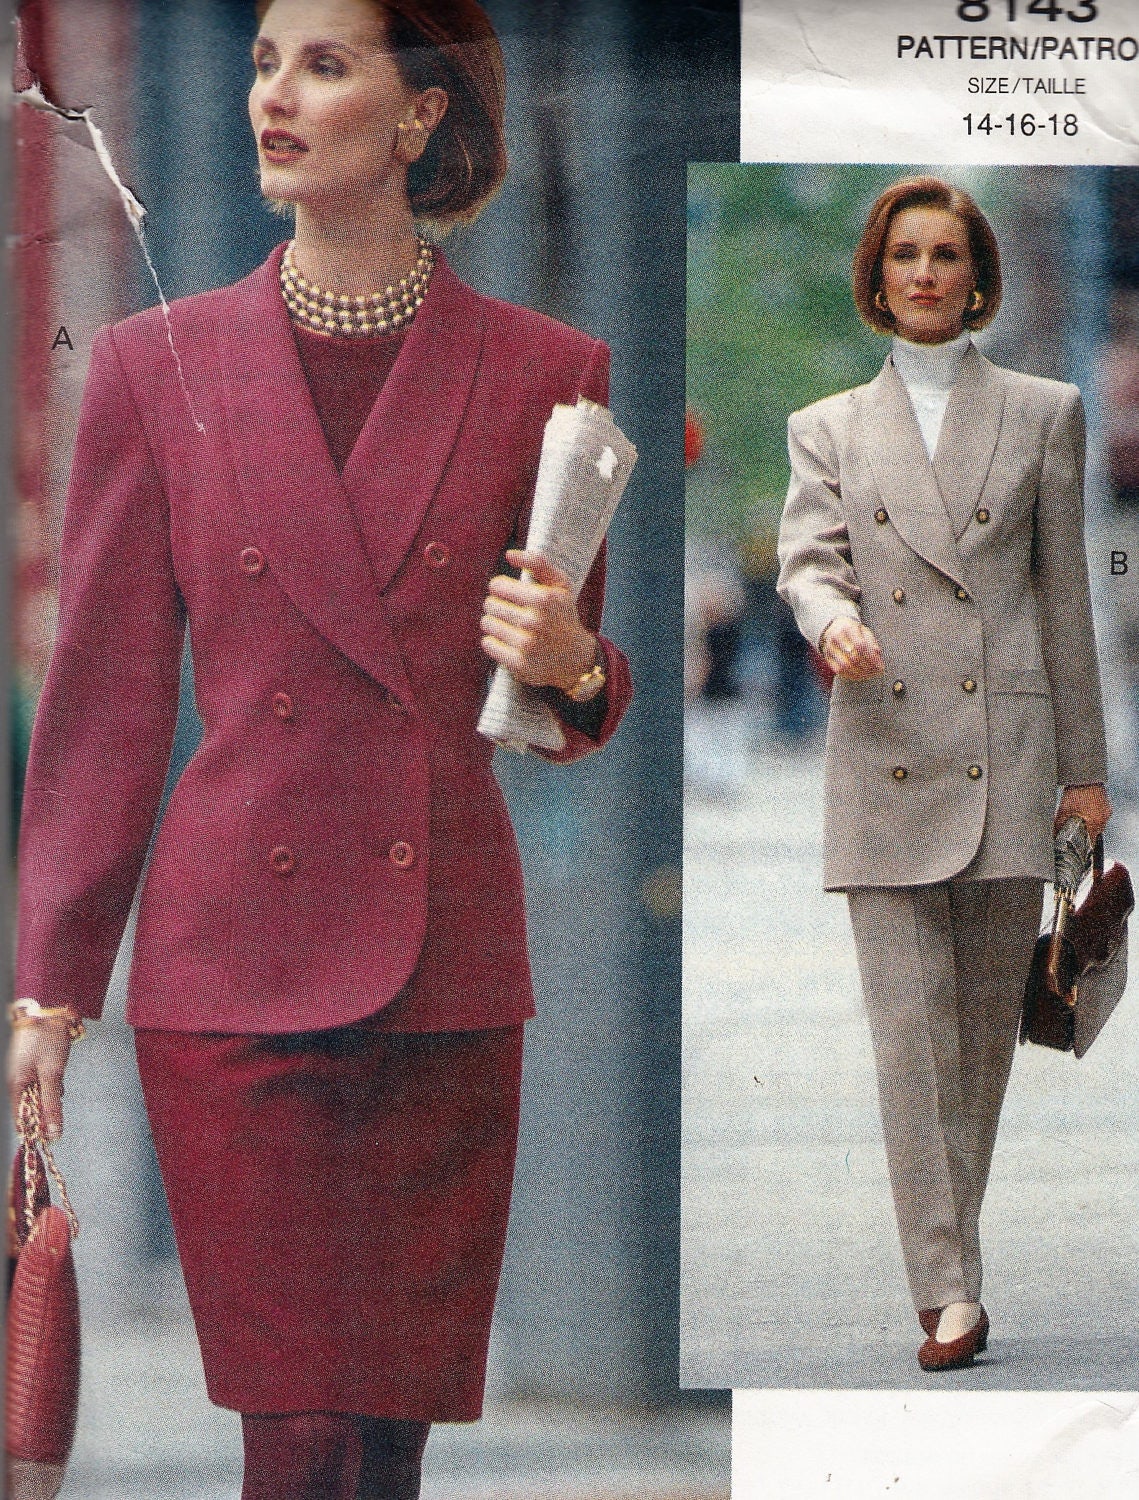 Sewing Pattern Vogue 8143 Women's Pantsuit with Pants or